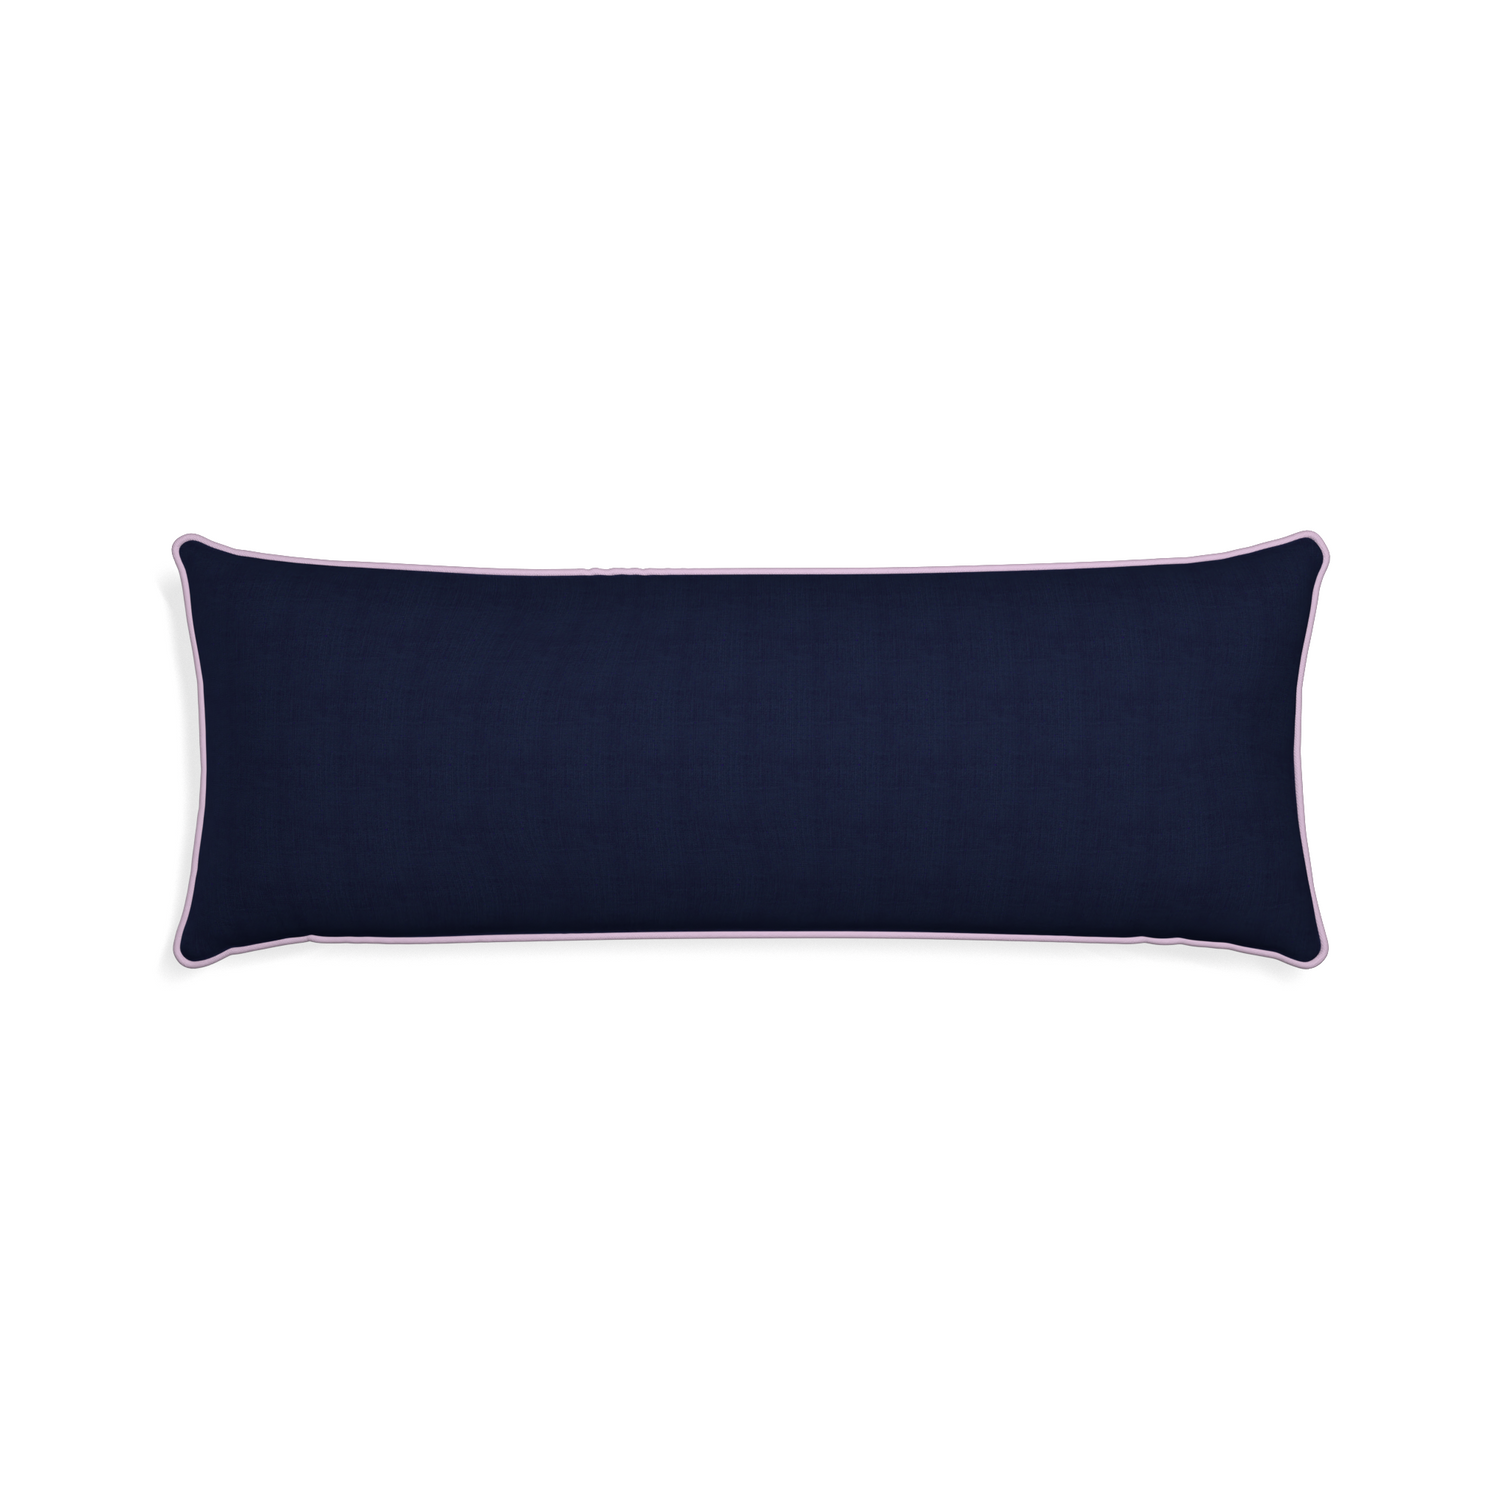 Xl-lumbar midnight custom pillow with l piping on white background